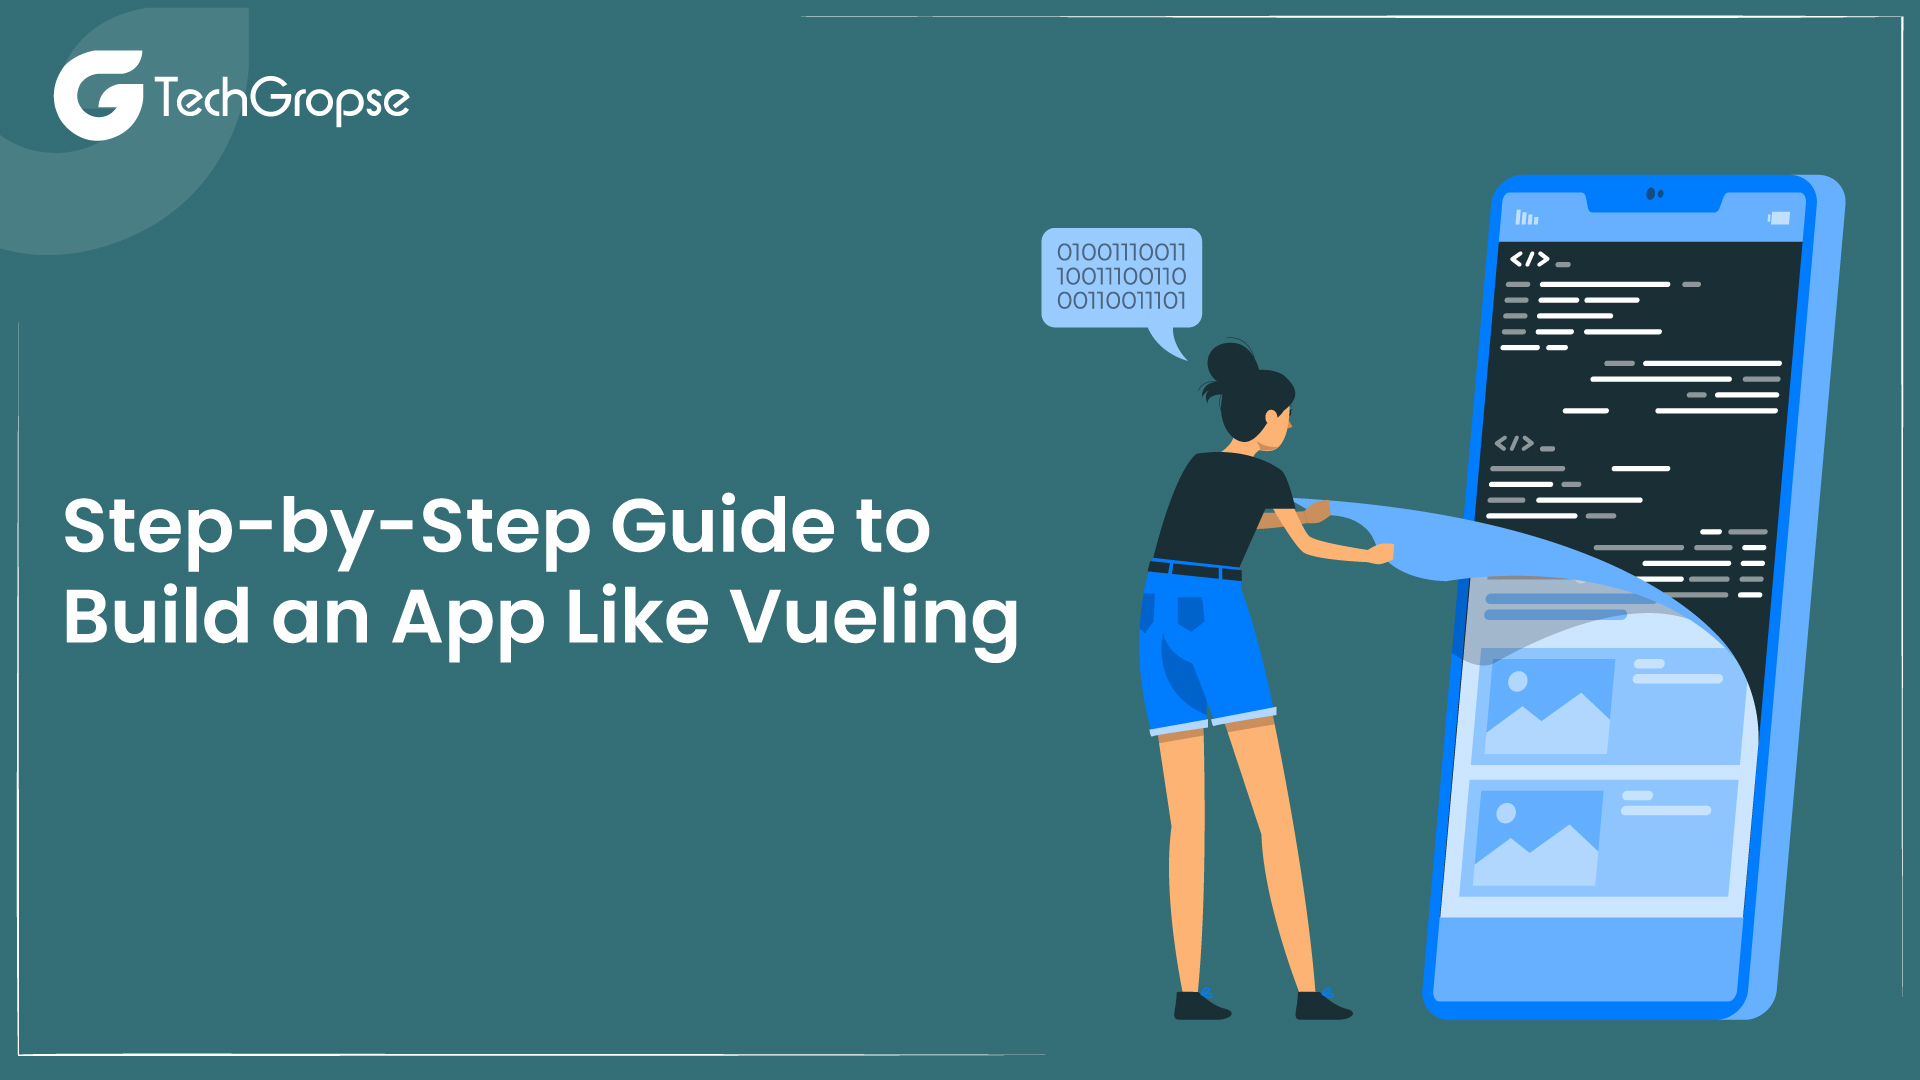 Step-by-Step Guide to Build an App Like Vueling